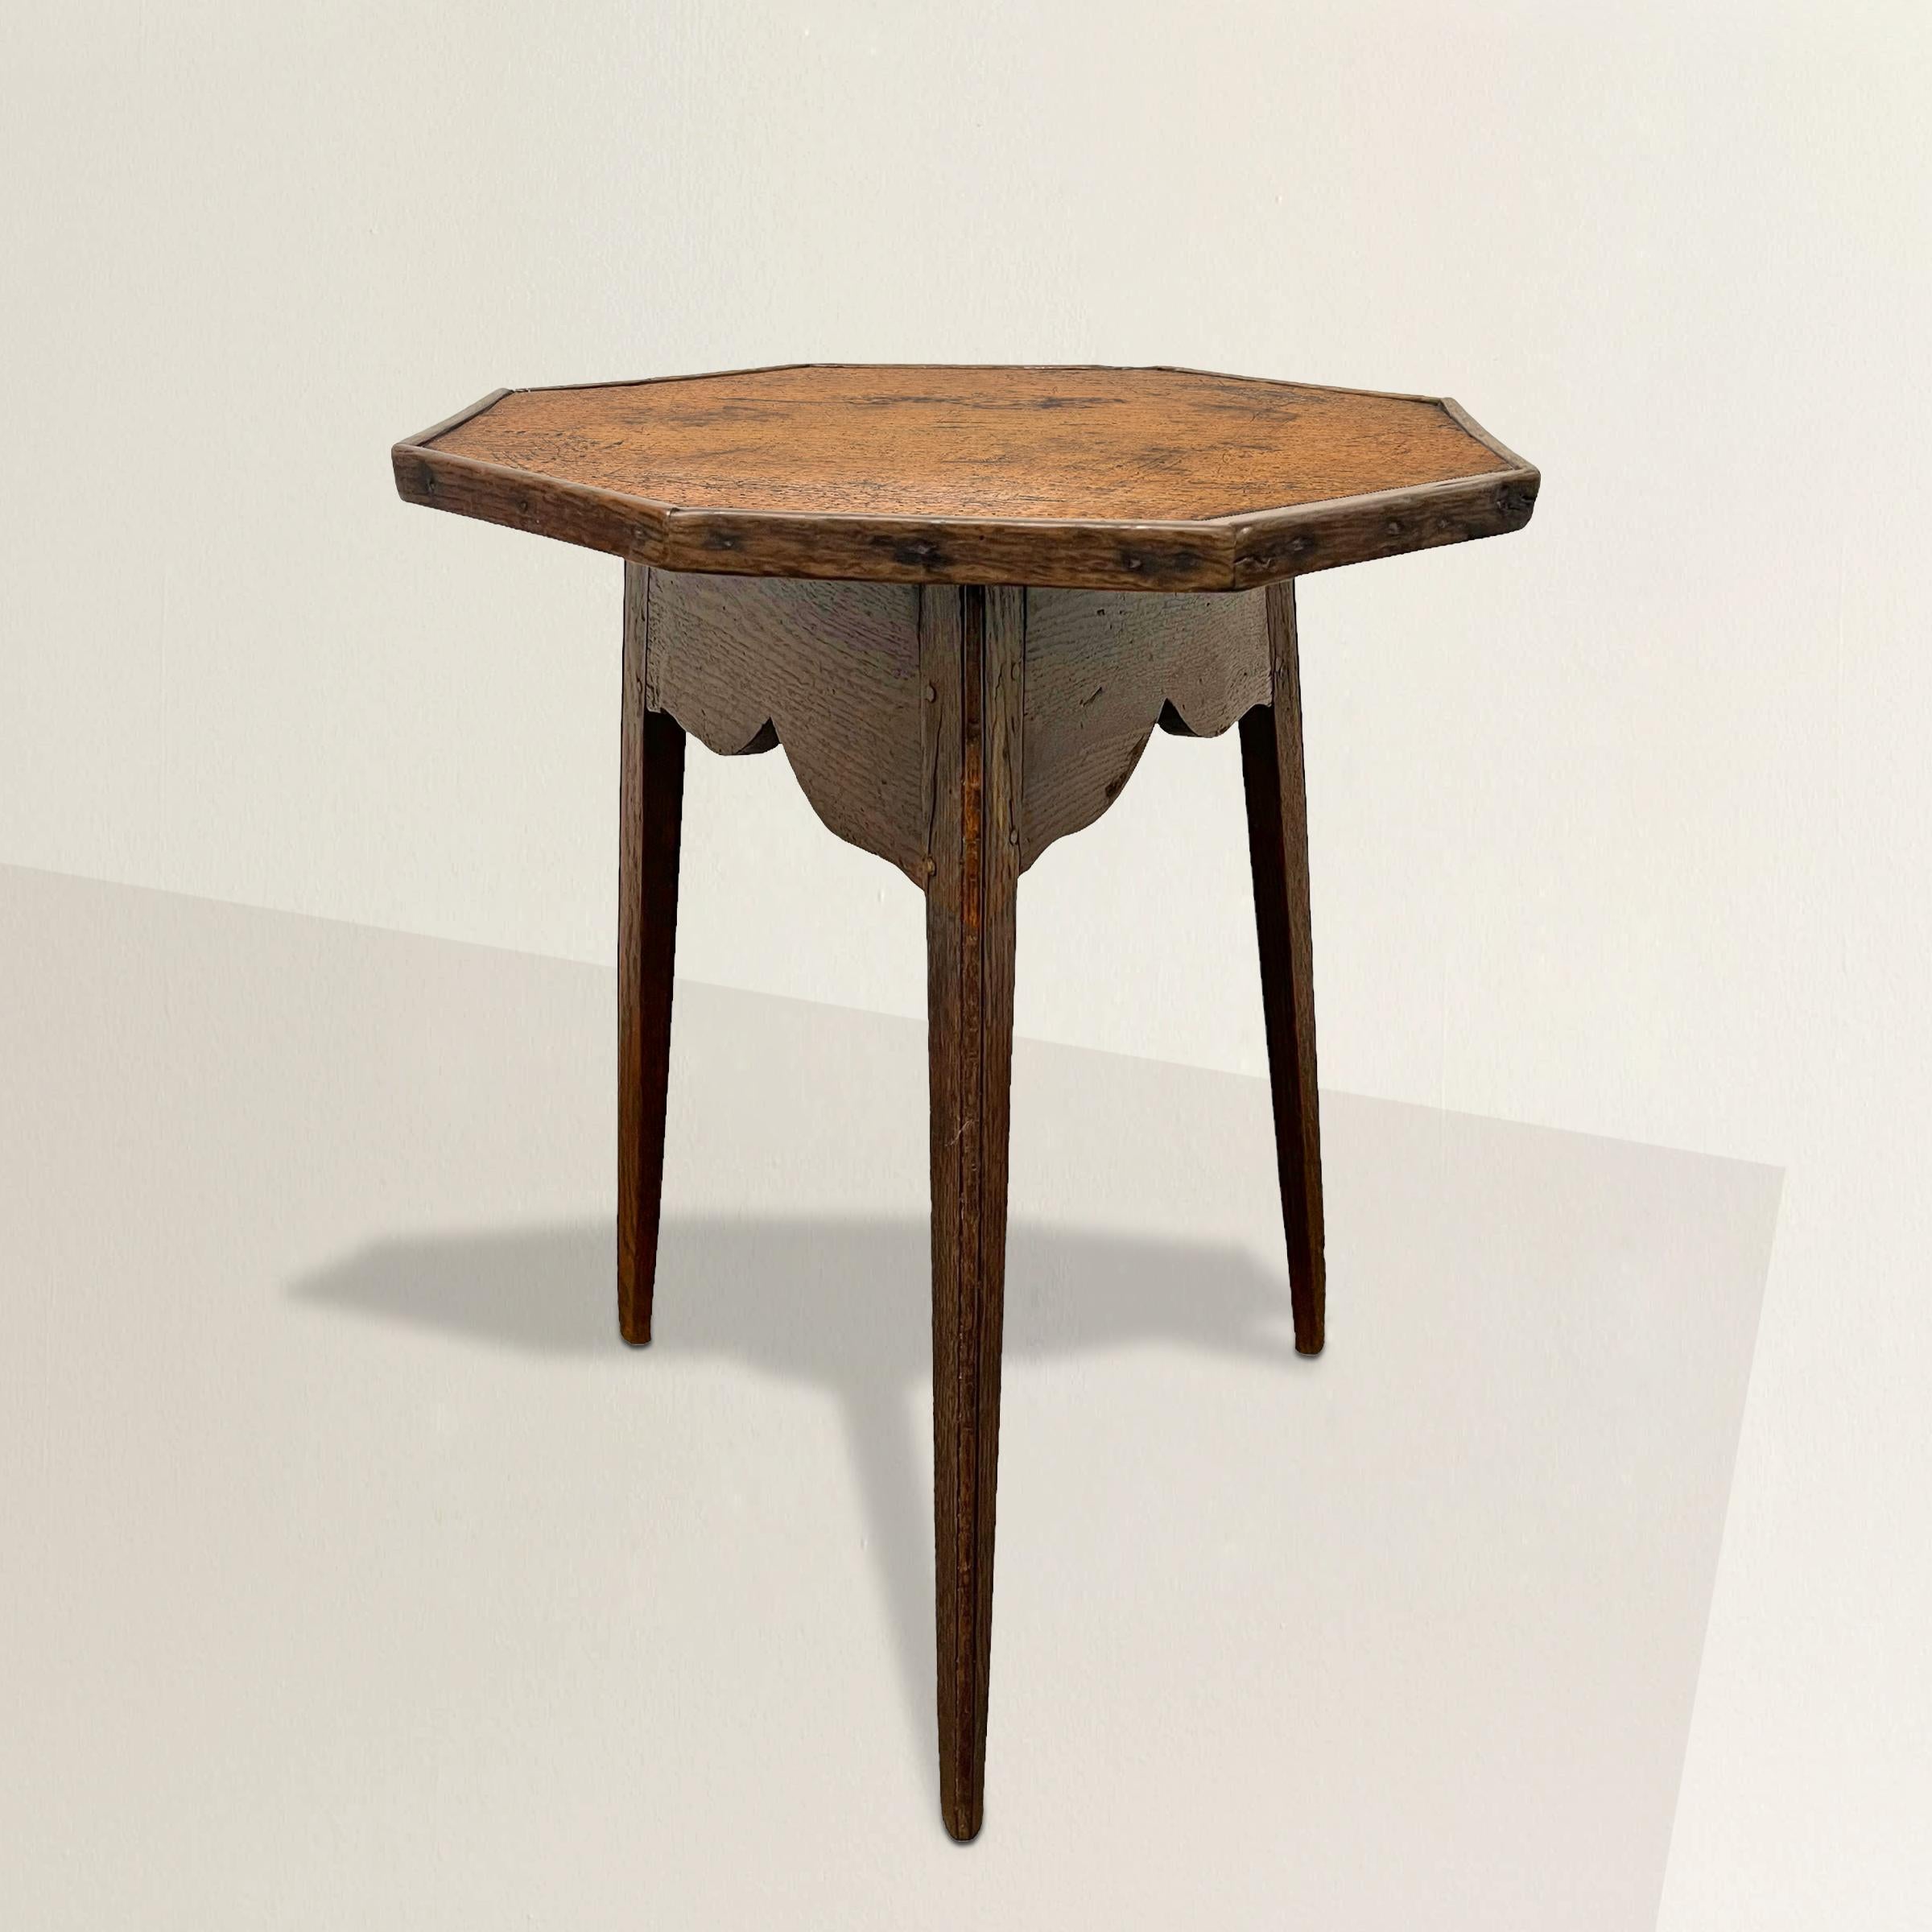 Step back in time with this early 19th-century English cricket table, a true gem of craftsmanship and history. Its striking octagonal top, fashioned from a single solid plank of elm, showcases the exquisite beauty of natural woodgrain. Supported by